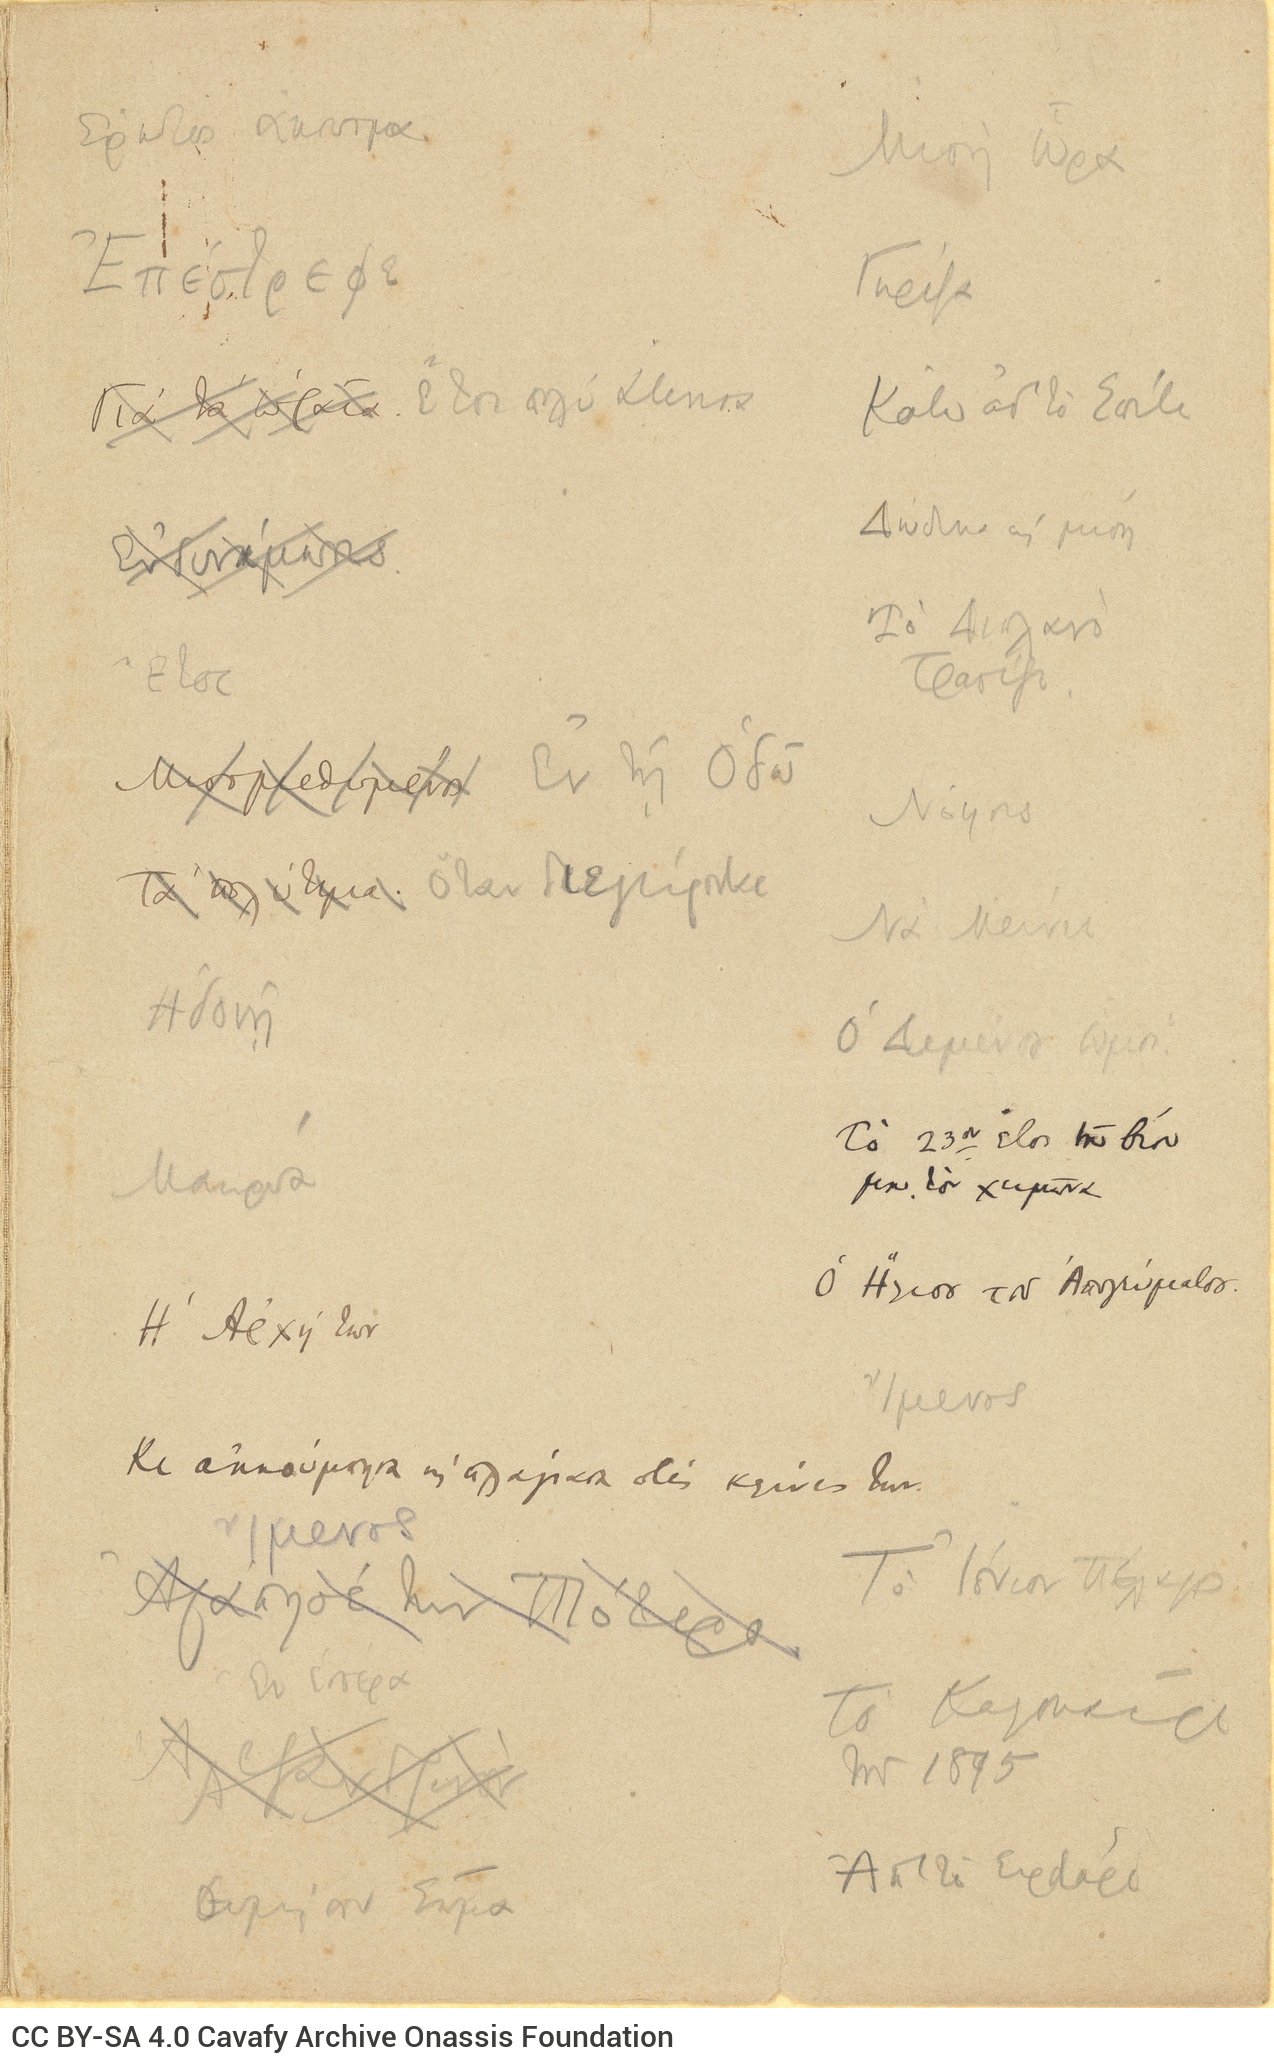 Handwritten list of poem titles on a double sheet notepaper. On the first page, the title "Passions" has been crossed out.